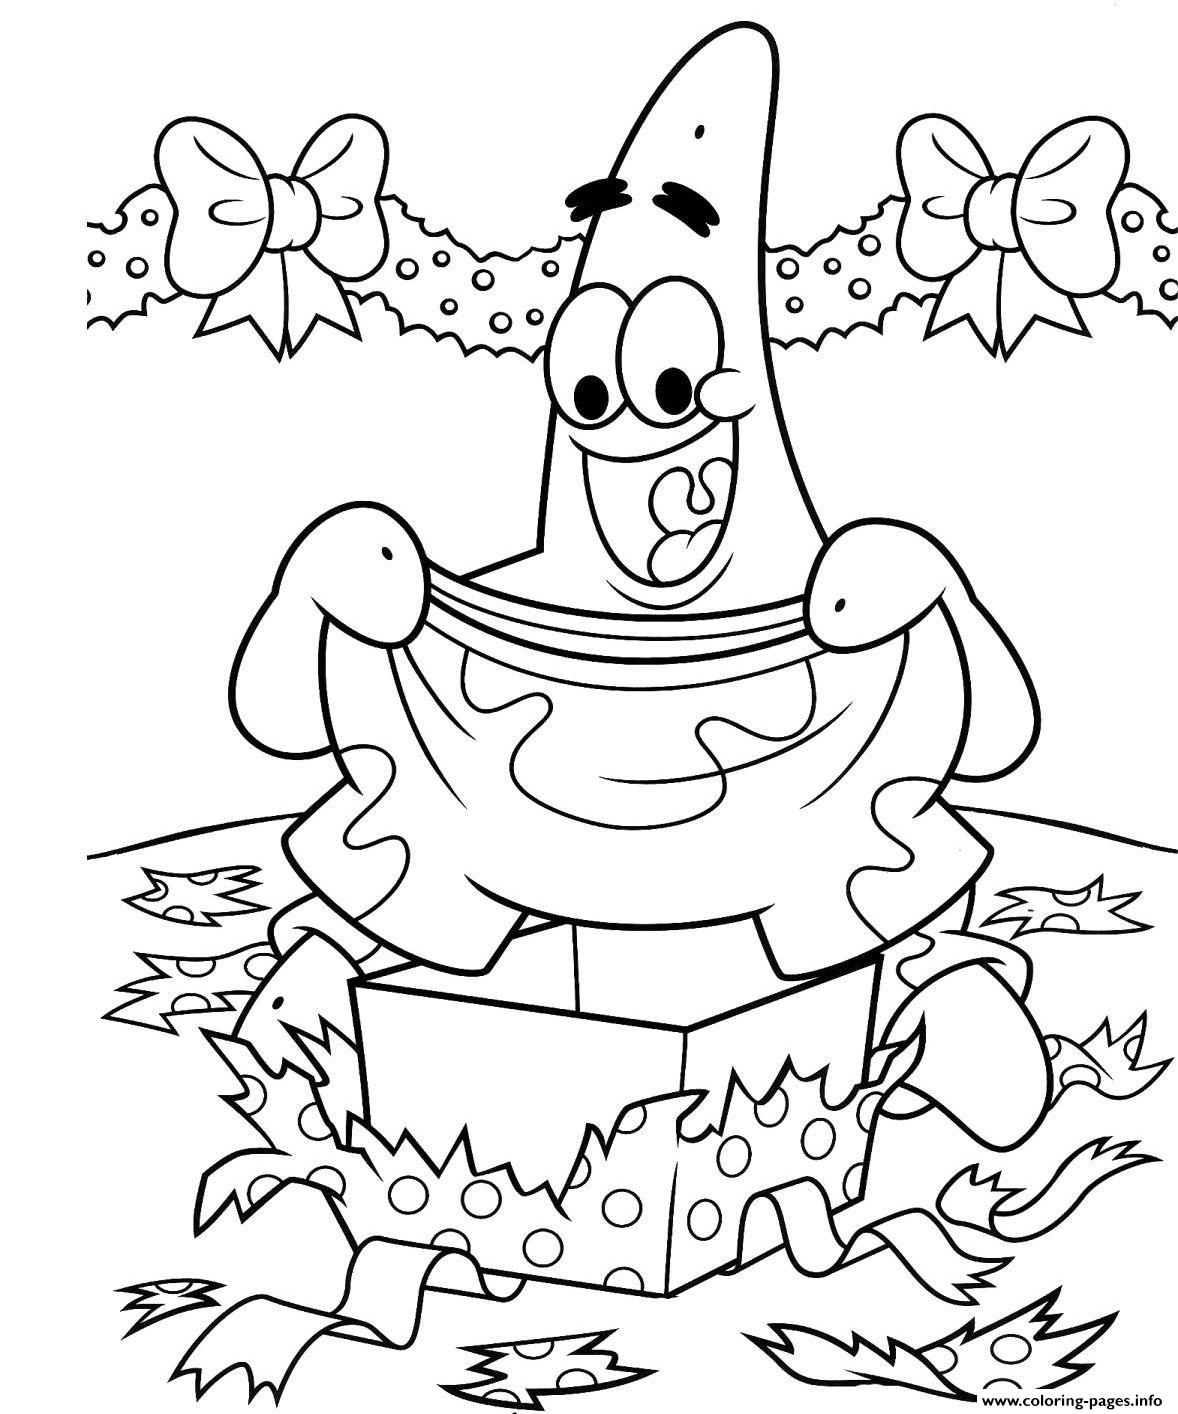 Coloring Pages Of Christmas Patrick Present59e4 coloring